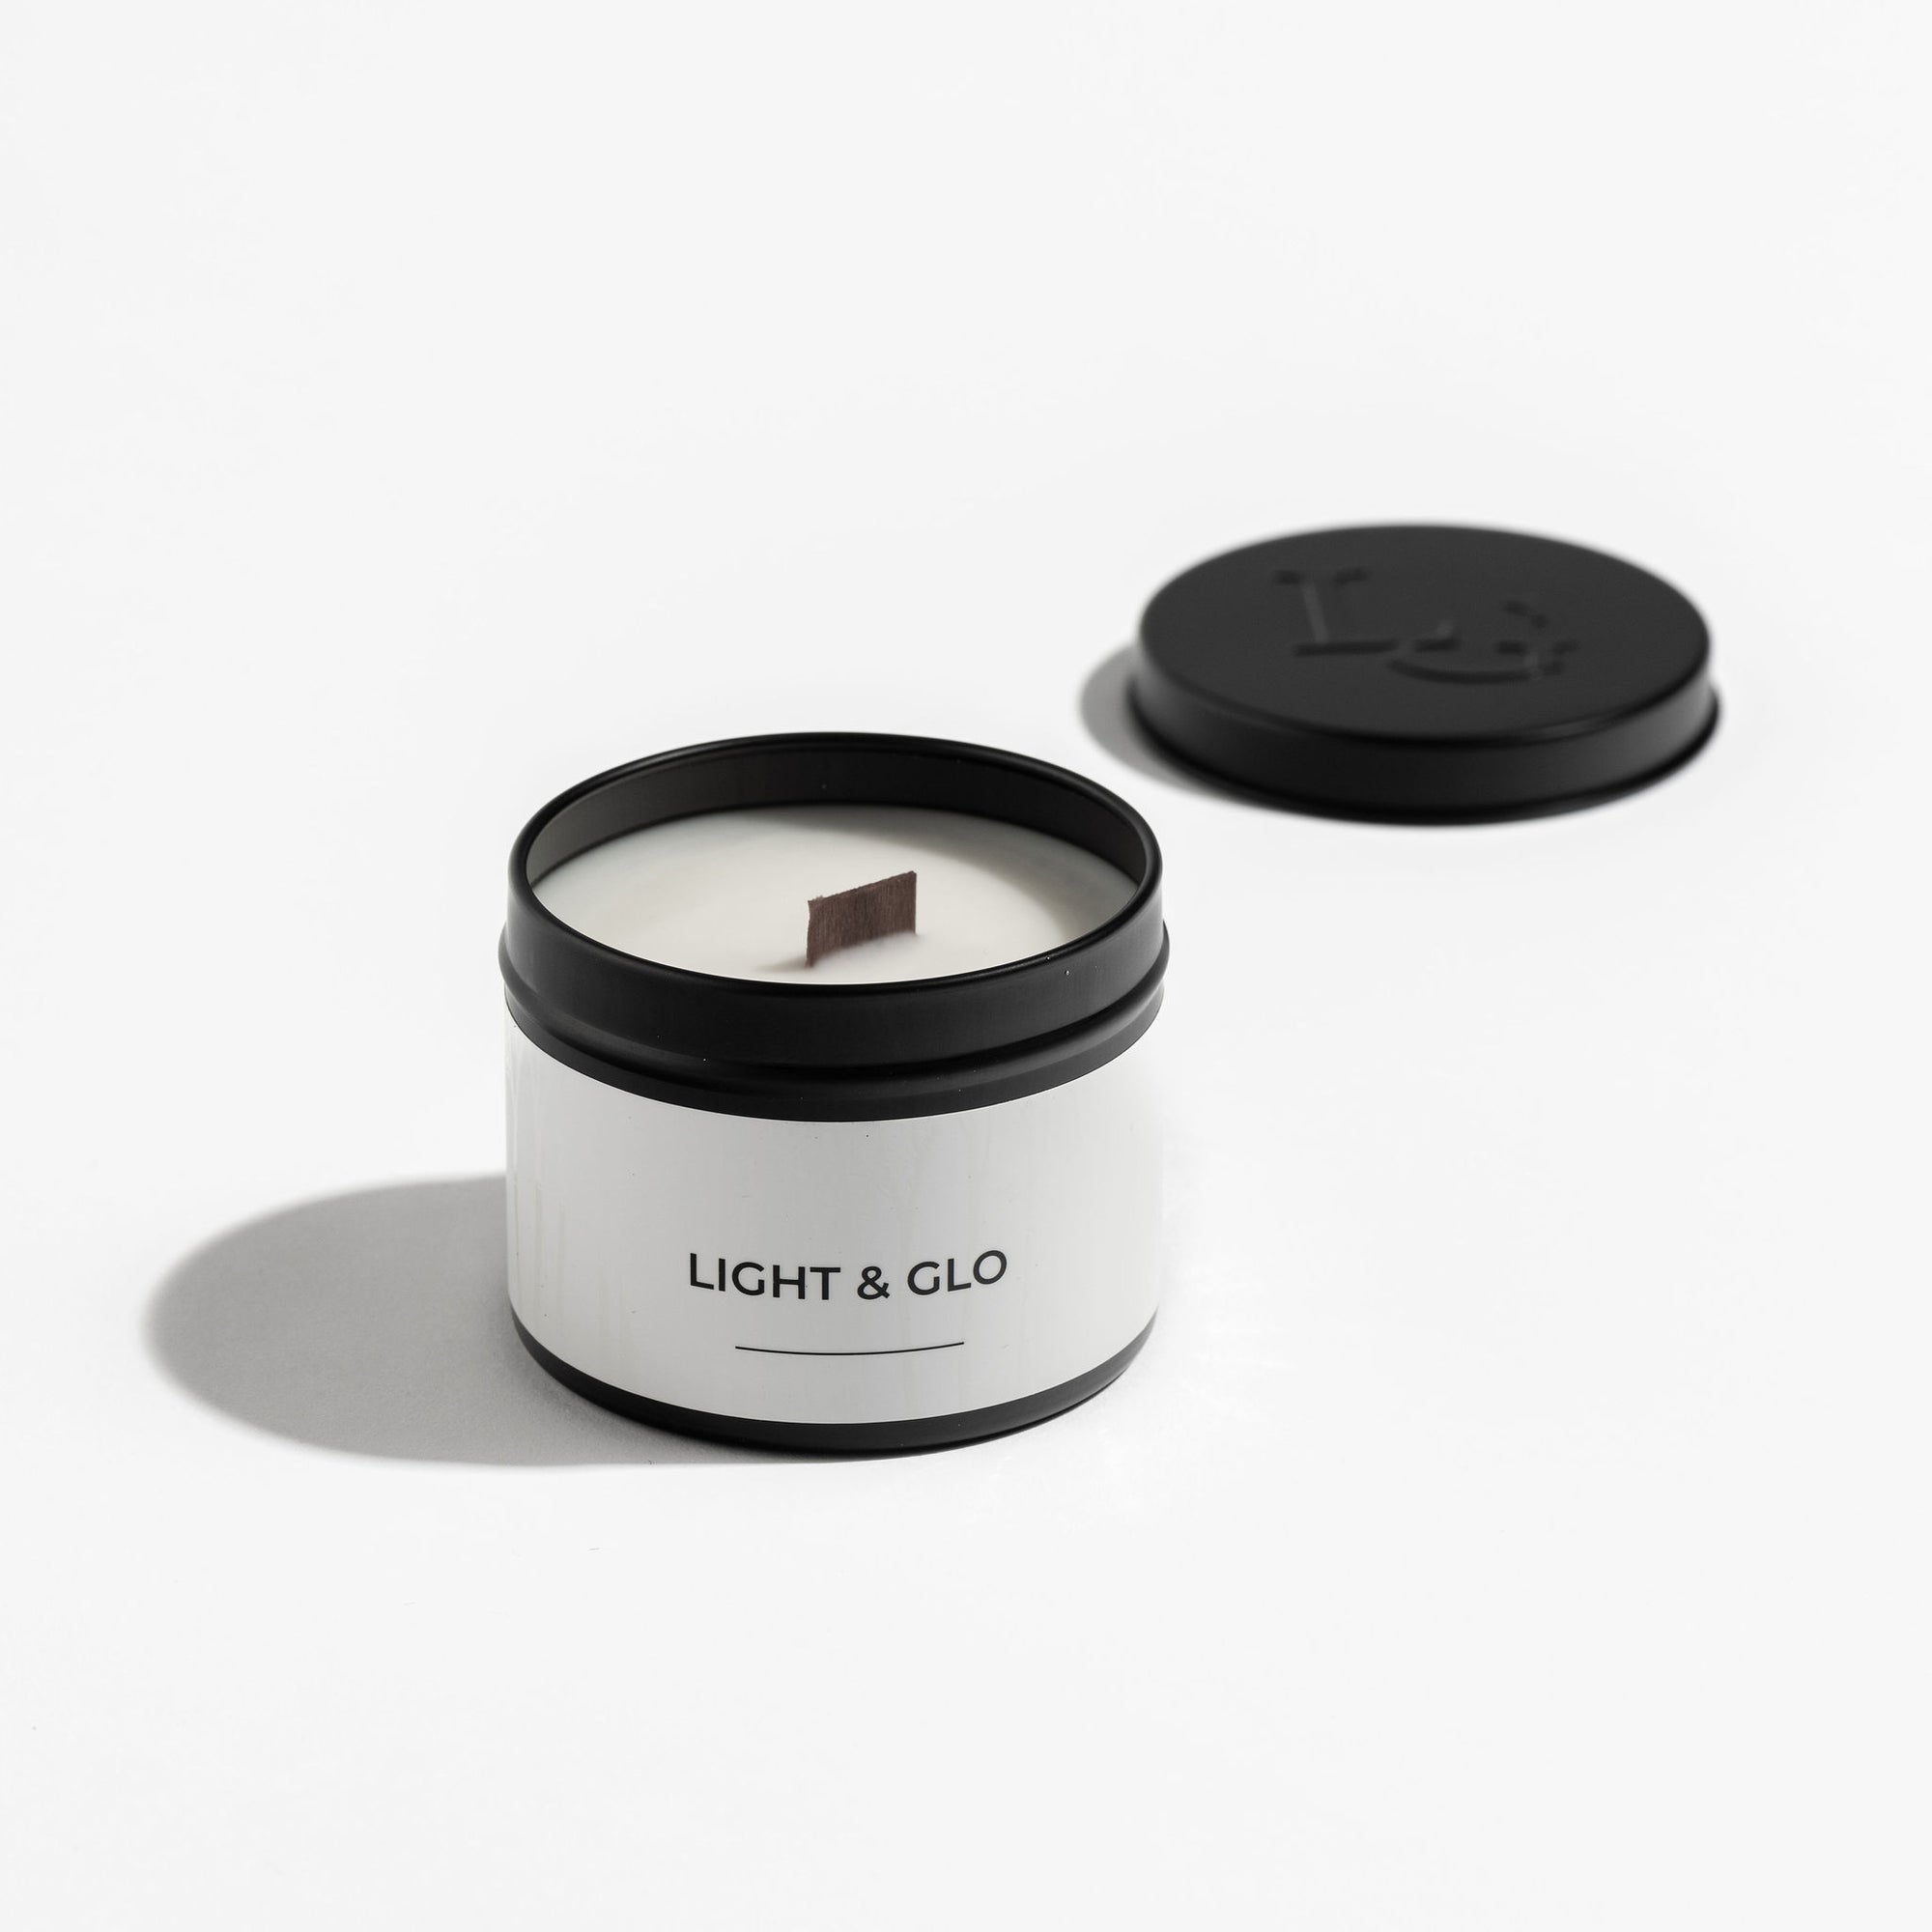 Black Raspberry & Vanilla - Monochrome Travel Candle | Luxury Candles & Home Fragrances by Light + Glo